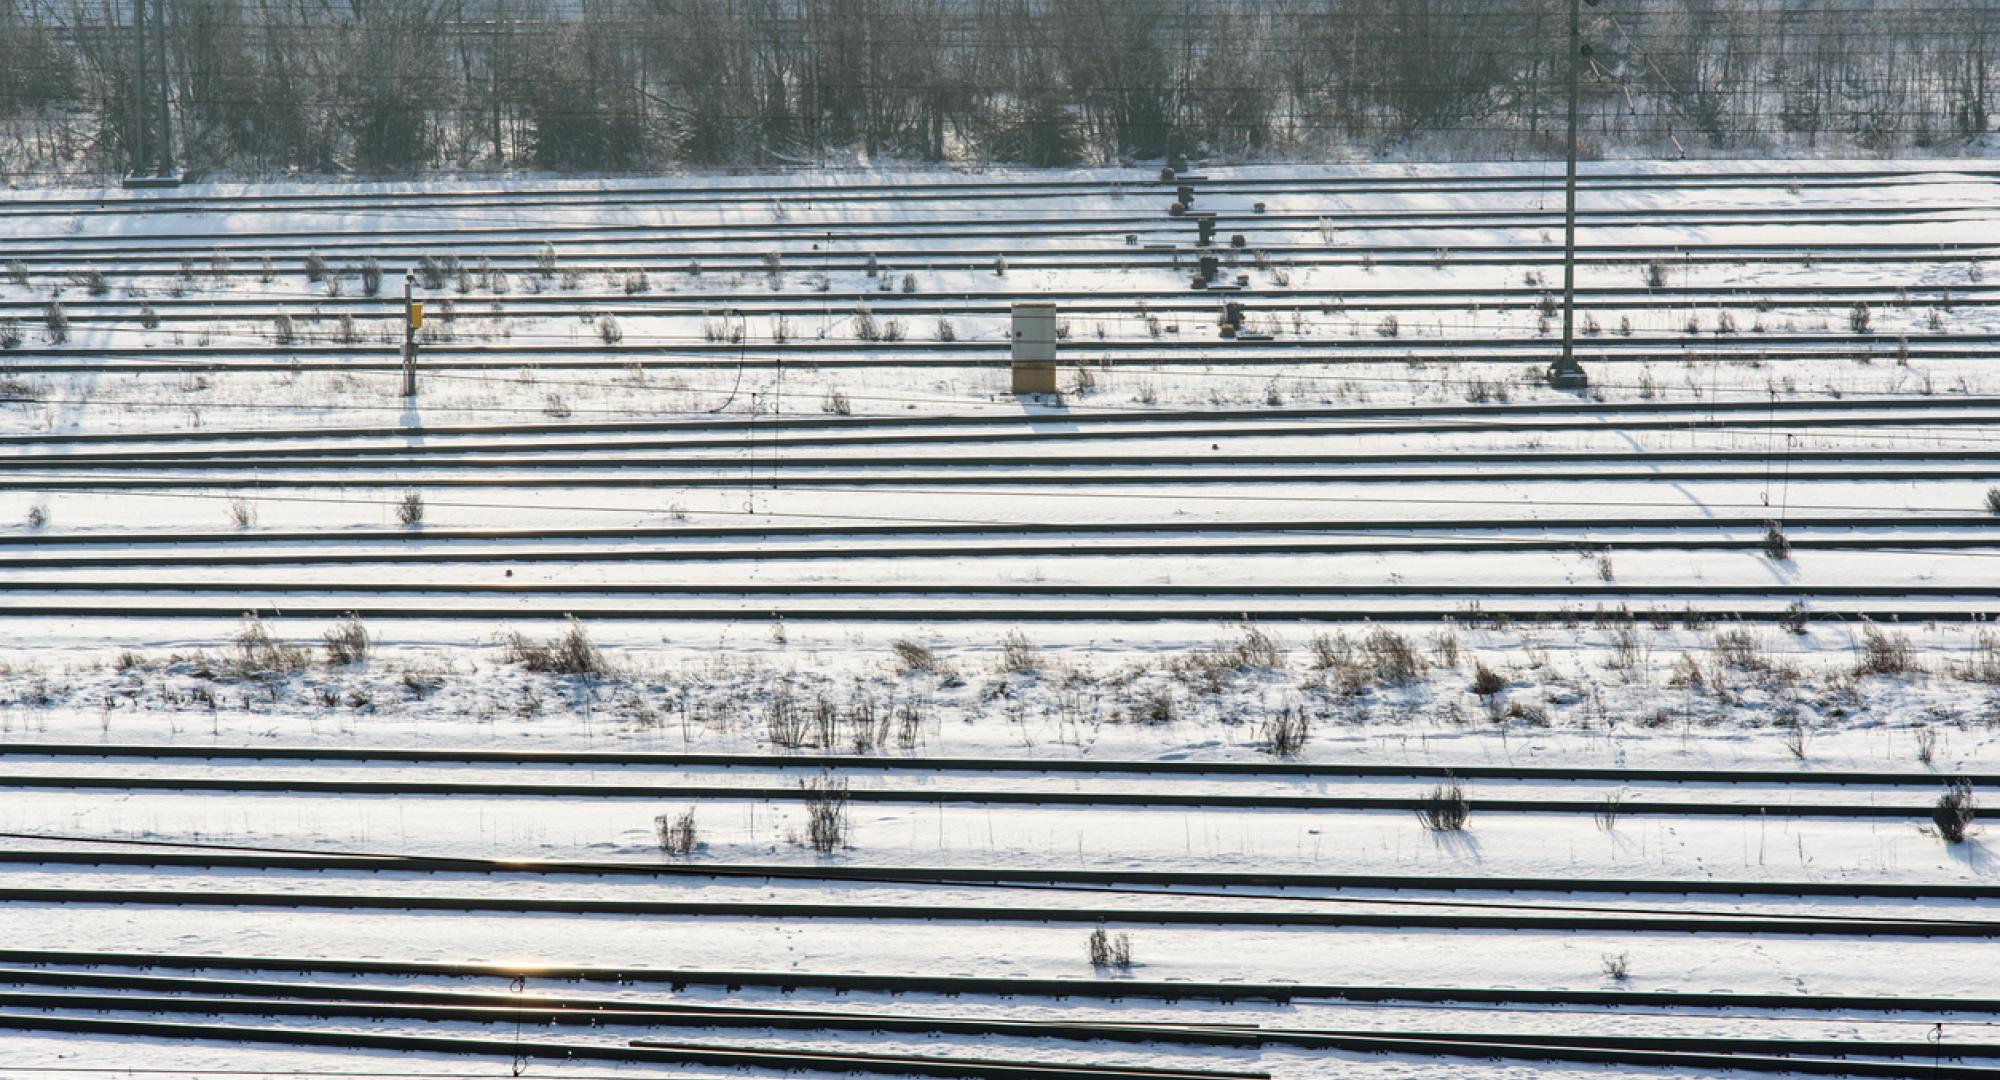 Rail systems at the freight yard in winter